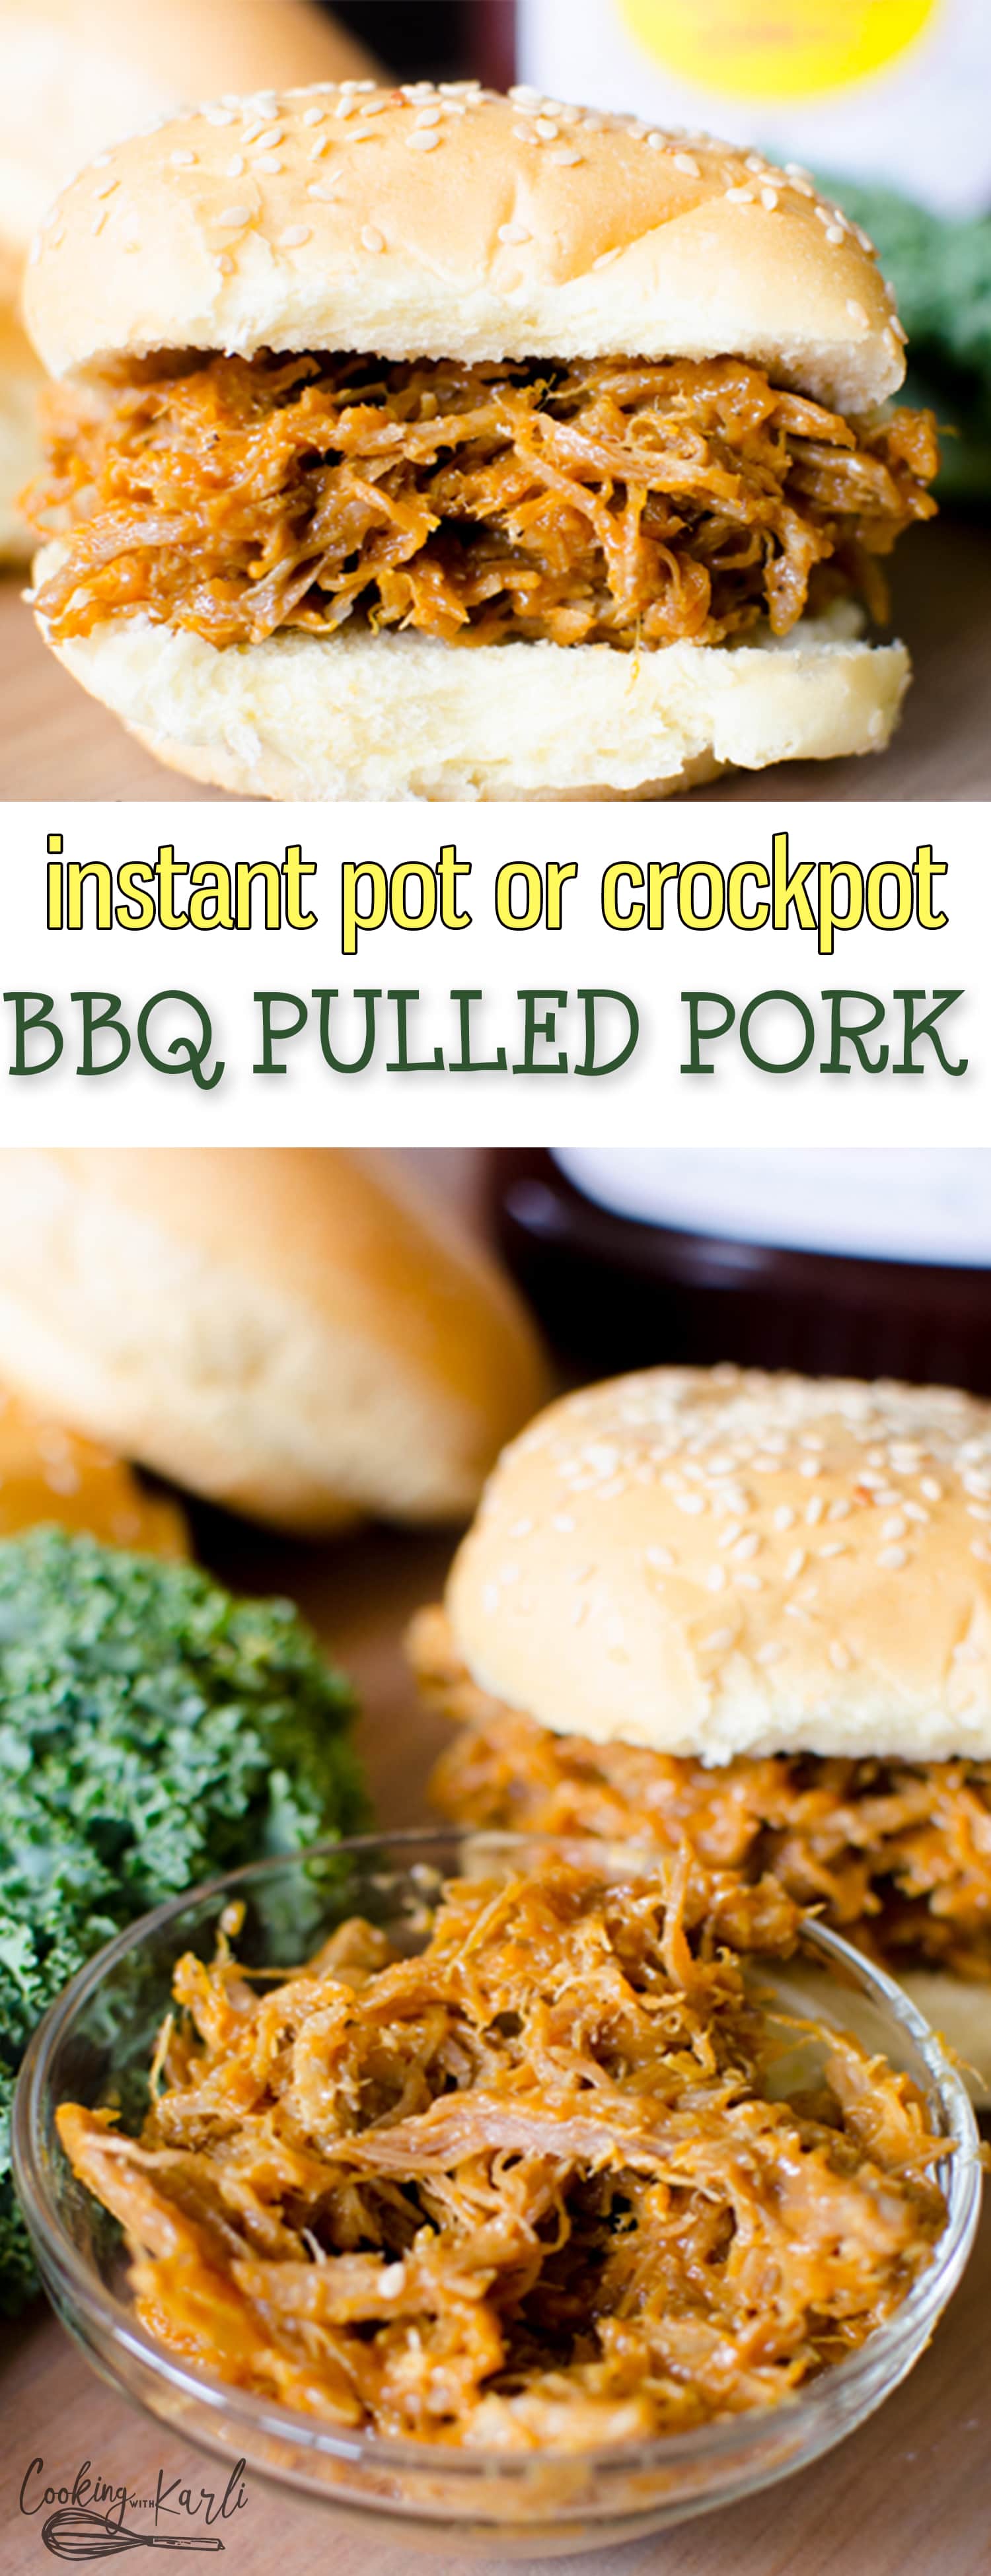 Pulled Pork is made in the Instant Pot or Crockpot and is fall apart tender, flavorful and filling! The doctored up BBQ sauce that covers the pork makes this meal completely mouth watering! This recipe is perfect for holidays, family parties or just a nice Sunday dinner. |Cooking with Karli| #pulledpork #memorialday #bbq #pork #crowd #recipe #instantpot #crockpot